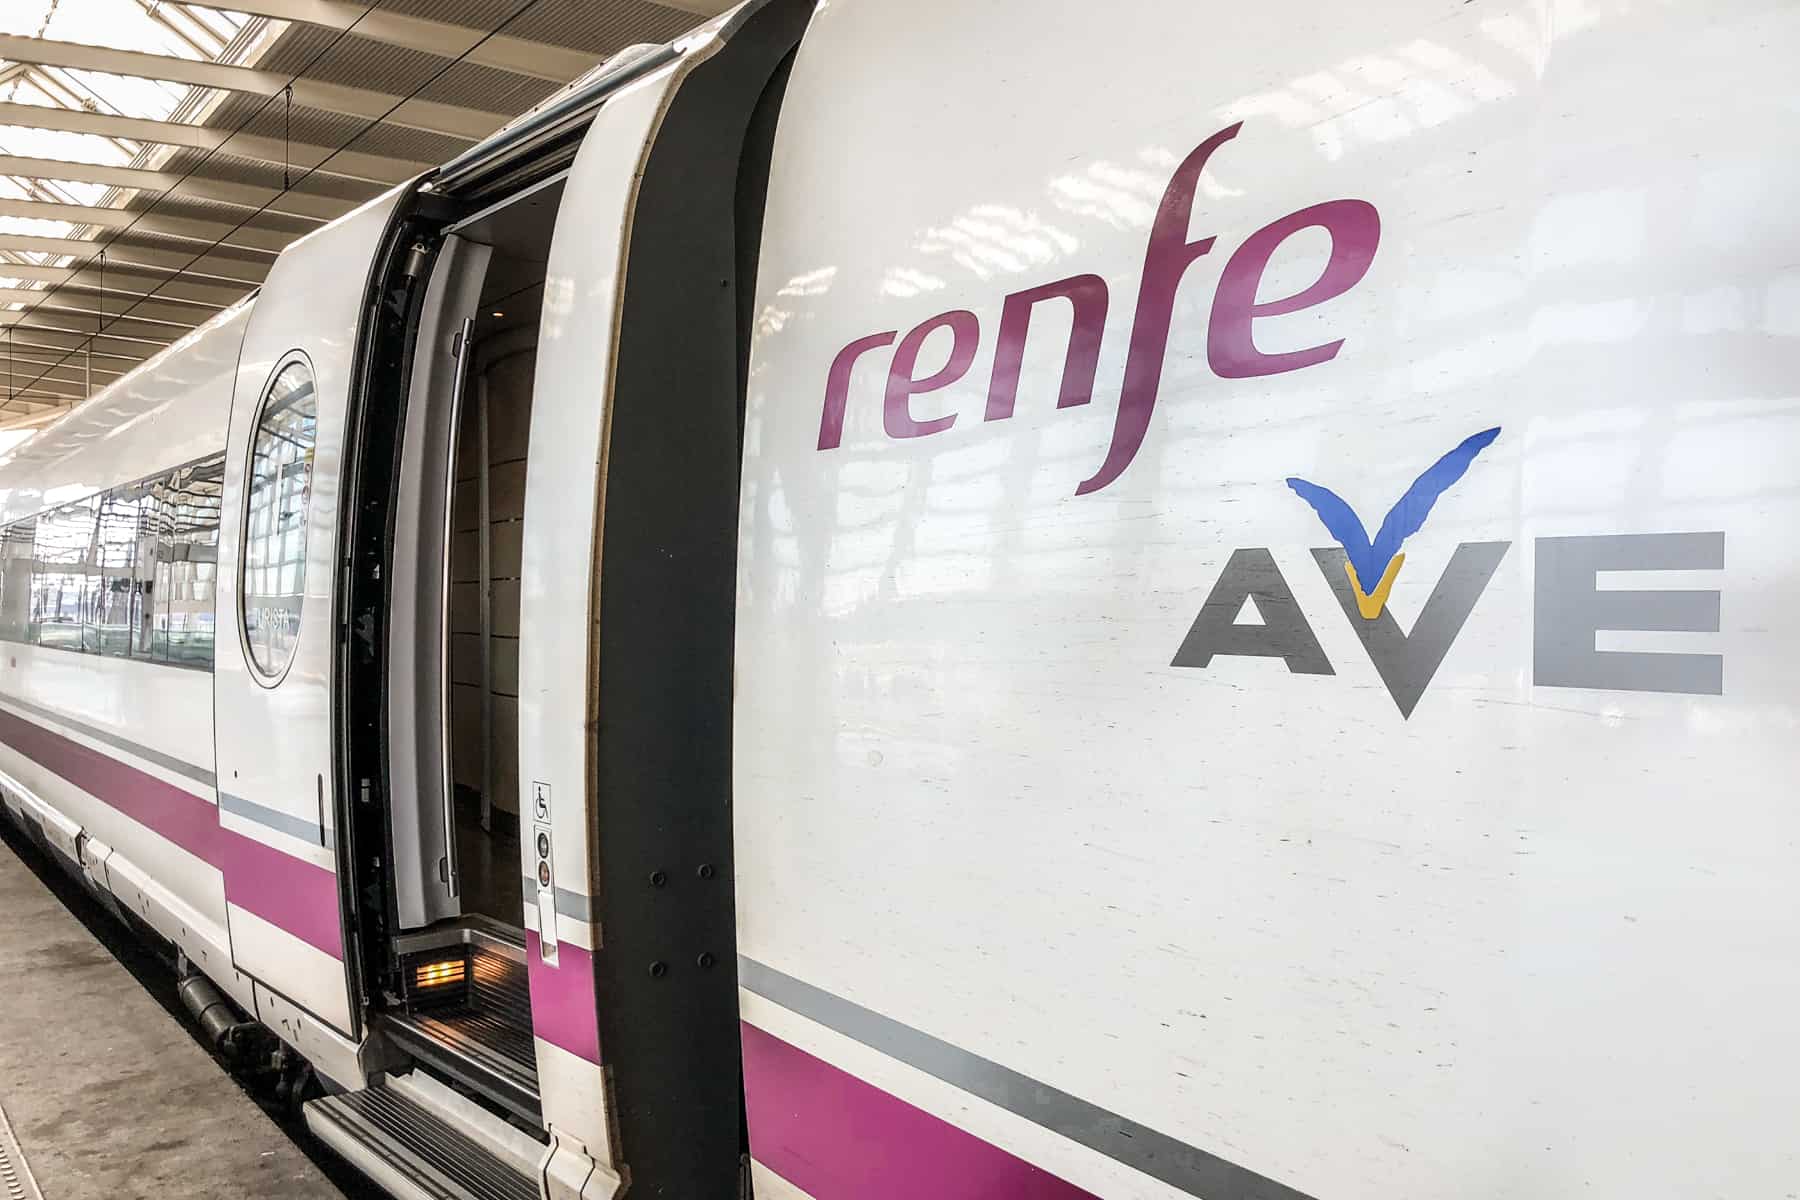 Close up of a white with pink stripe Renfe AVE train in Spain, waiting at a platform with open doors. 